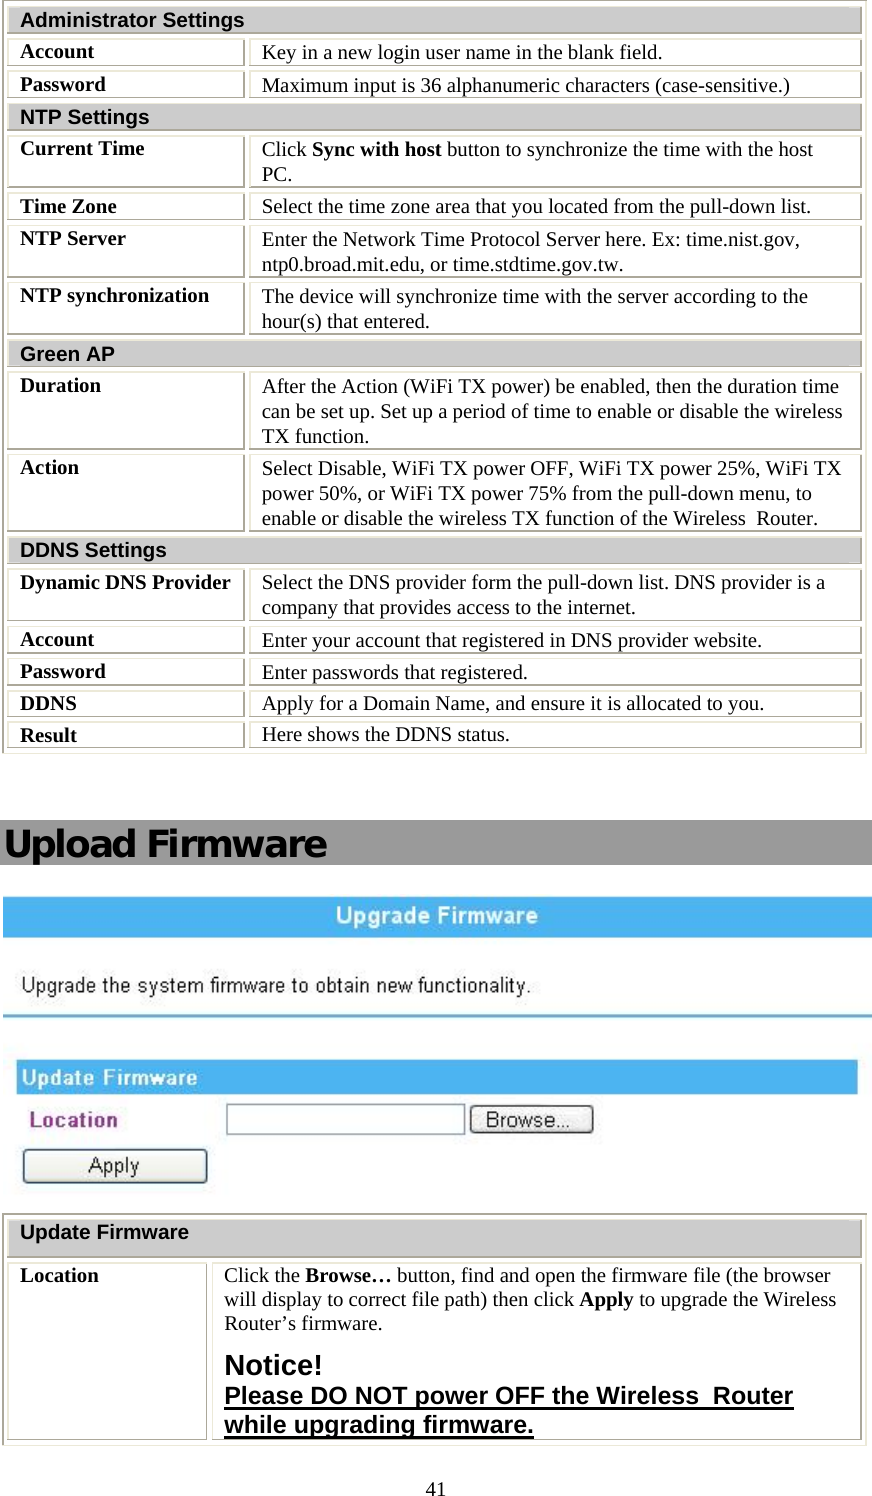   41Administrator Settings Account  Key in a new login user name in the blank field. Password  Maximum input is 36 alphanumeric characters (case-sensitive.) NTP Settings Current Time  Click Sync with host button to synchronize the time with the host PC. Time Zone  Select the time zone area that you located from the pull-down list. NTP Server  Enter the Network Time Protocol Server here. Ex: time.nist.gov, ntp0.broad.mit.edu, or time.stdtime.gov.tw. NTP synchronization  The device will synchronize time with the server according to the hour(s) that entered. Green AP Duration  After the Action (WiFi TX power) be enabled, then the duration time can be set up. Set up a period of time to enable or disable the wireless TX function. Action  Select Disable, WiFi TX power OFF, WiFi TX power 25%, WiFi TX power 50%, or WiFi TX power 75% from the pull-down menu, to enable or disable the wireless TX function of the Wireless  Router.  DDNS Settings Dynamic DNS Provider  Select the DNS provider form the pull-down list. DNS provider is a company that provides access to the internet. Account  Enter your account that registered in DNS provider website. Password   Enter passwords that registered.  DDNS  Apply for a Domain Name, and ensure it is allocated to you. Result  Here shows the DDNS status.  Upload Firmware  Update Firmware Location  Click the Browse… button, find and open the firmware file (the browser will display to correct file path) then click Apply to upgrade the Wireless  Router’s firmware.  Notice! Please DO NOT power OFF the Wireless  Router while upgrading firmware. 